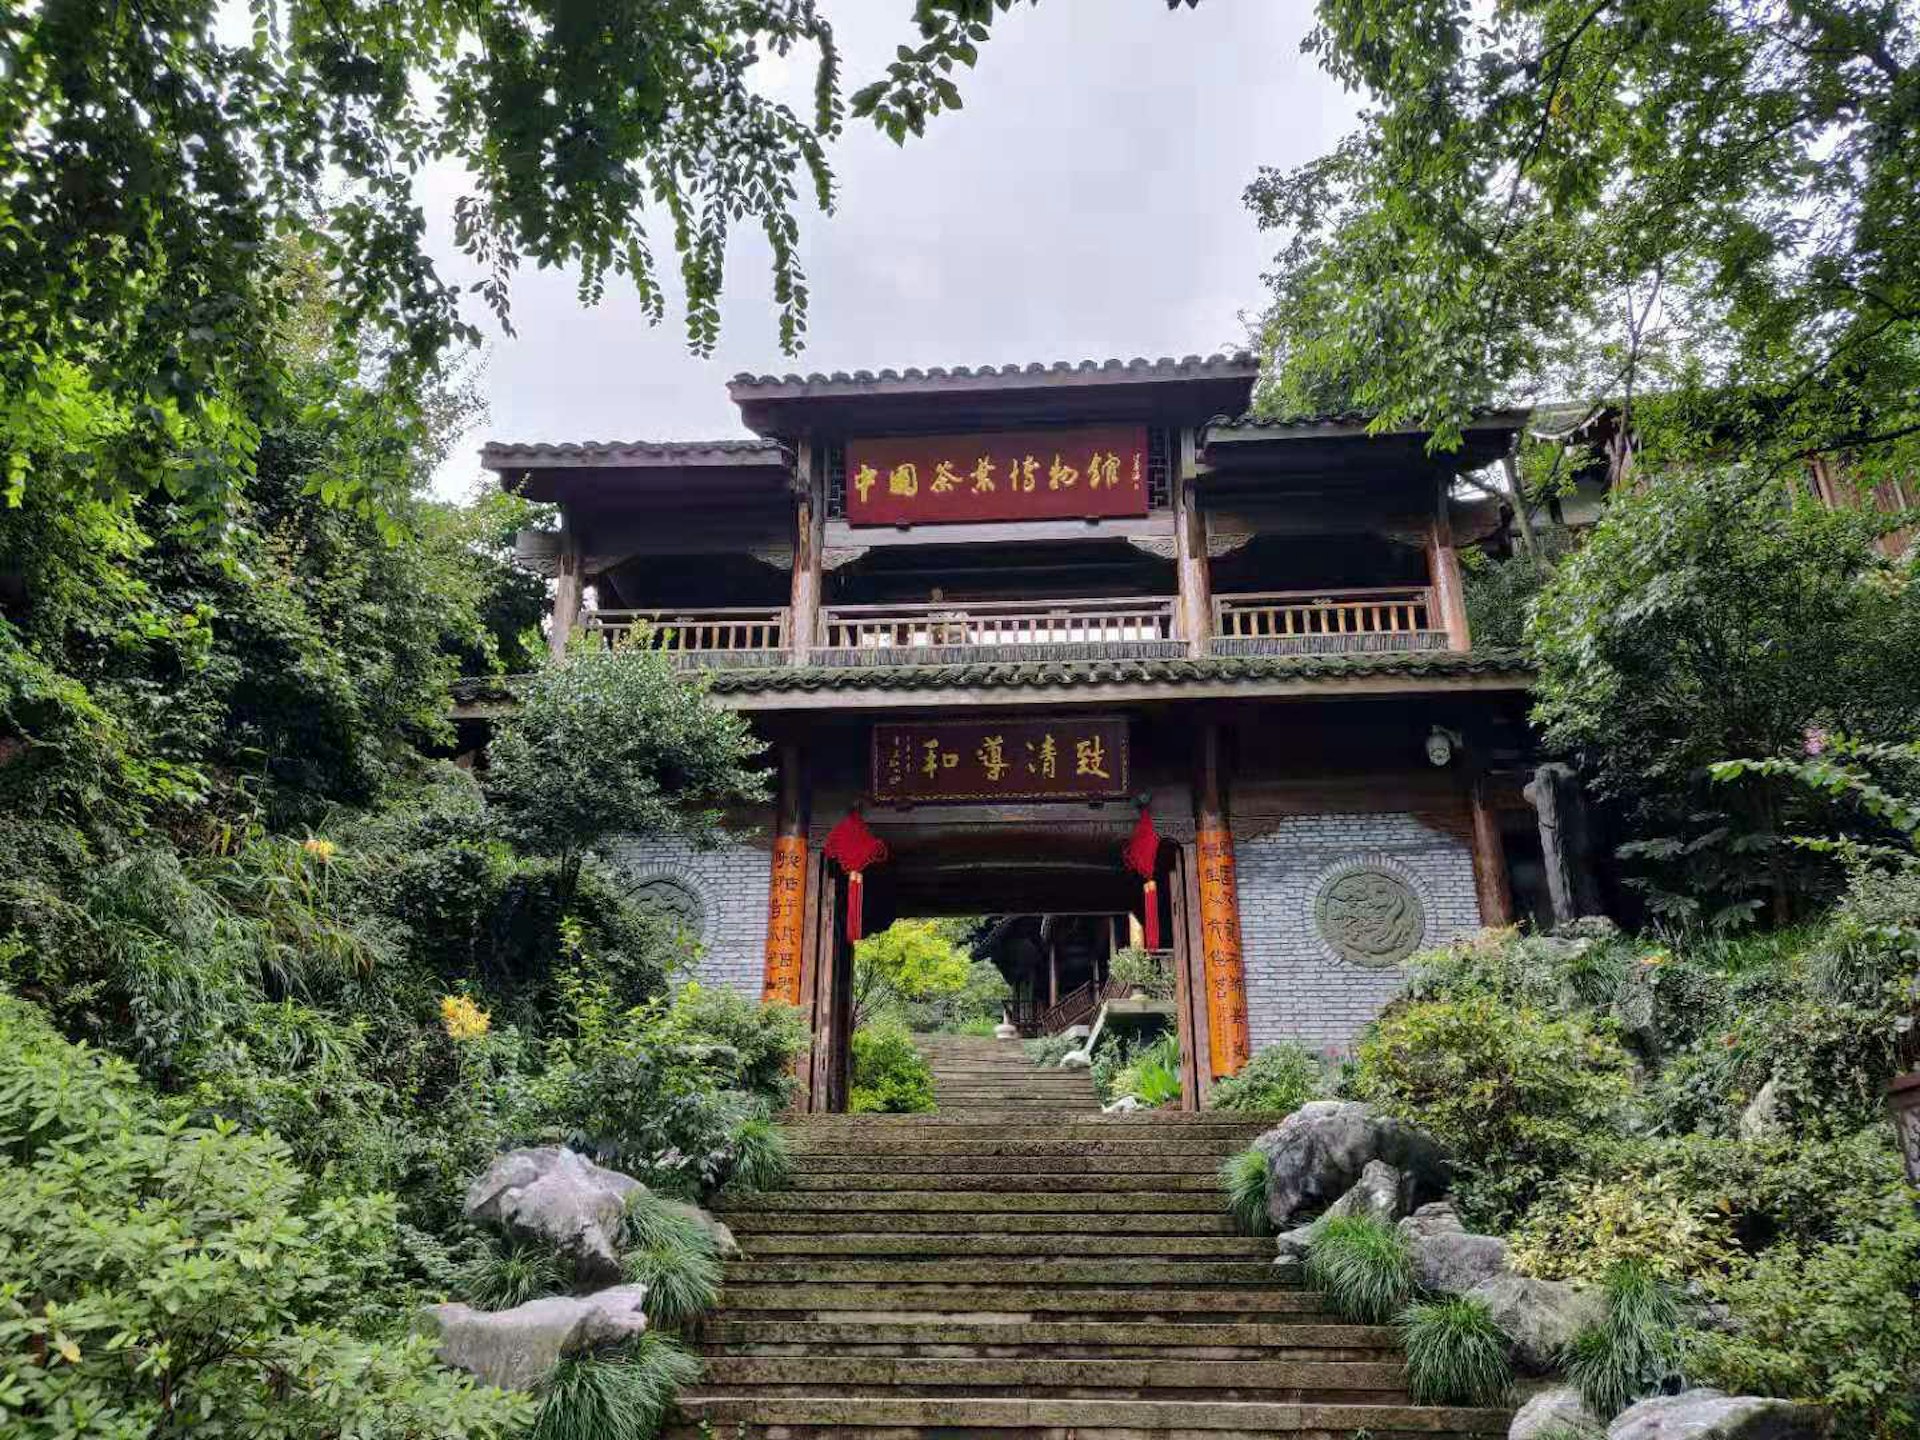 A traditional Chinese gate with flying eaves at the top of some steps surrounded by rocks and trees